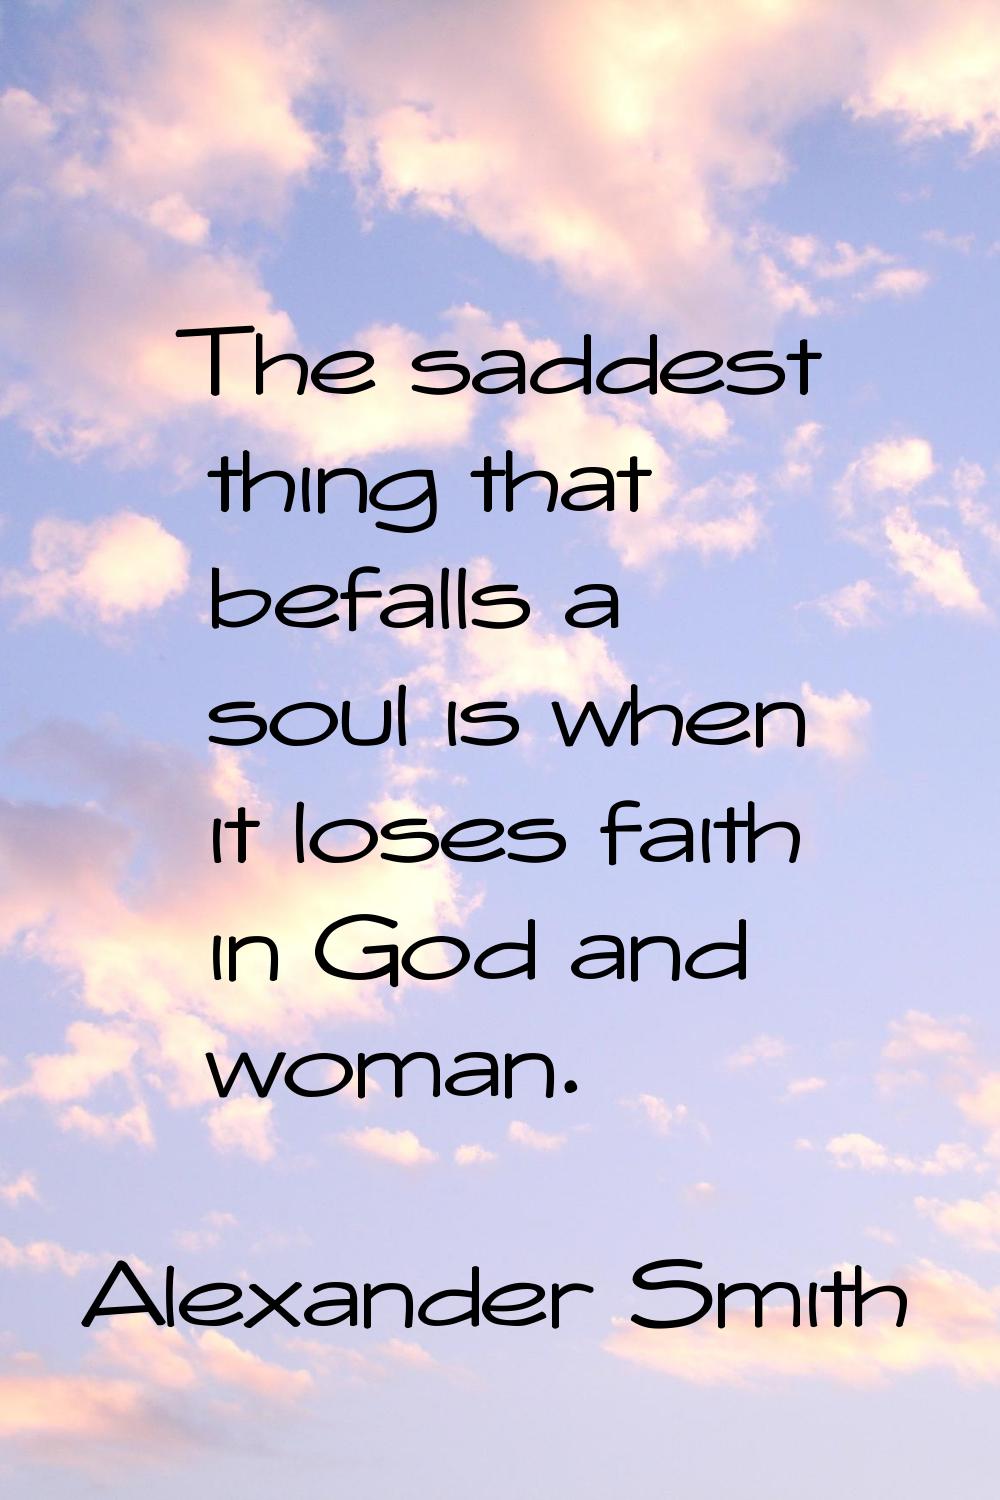 The saddest thing that befalls a soul is when it loses faith in God and woman.